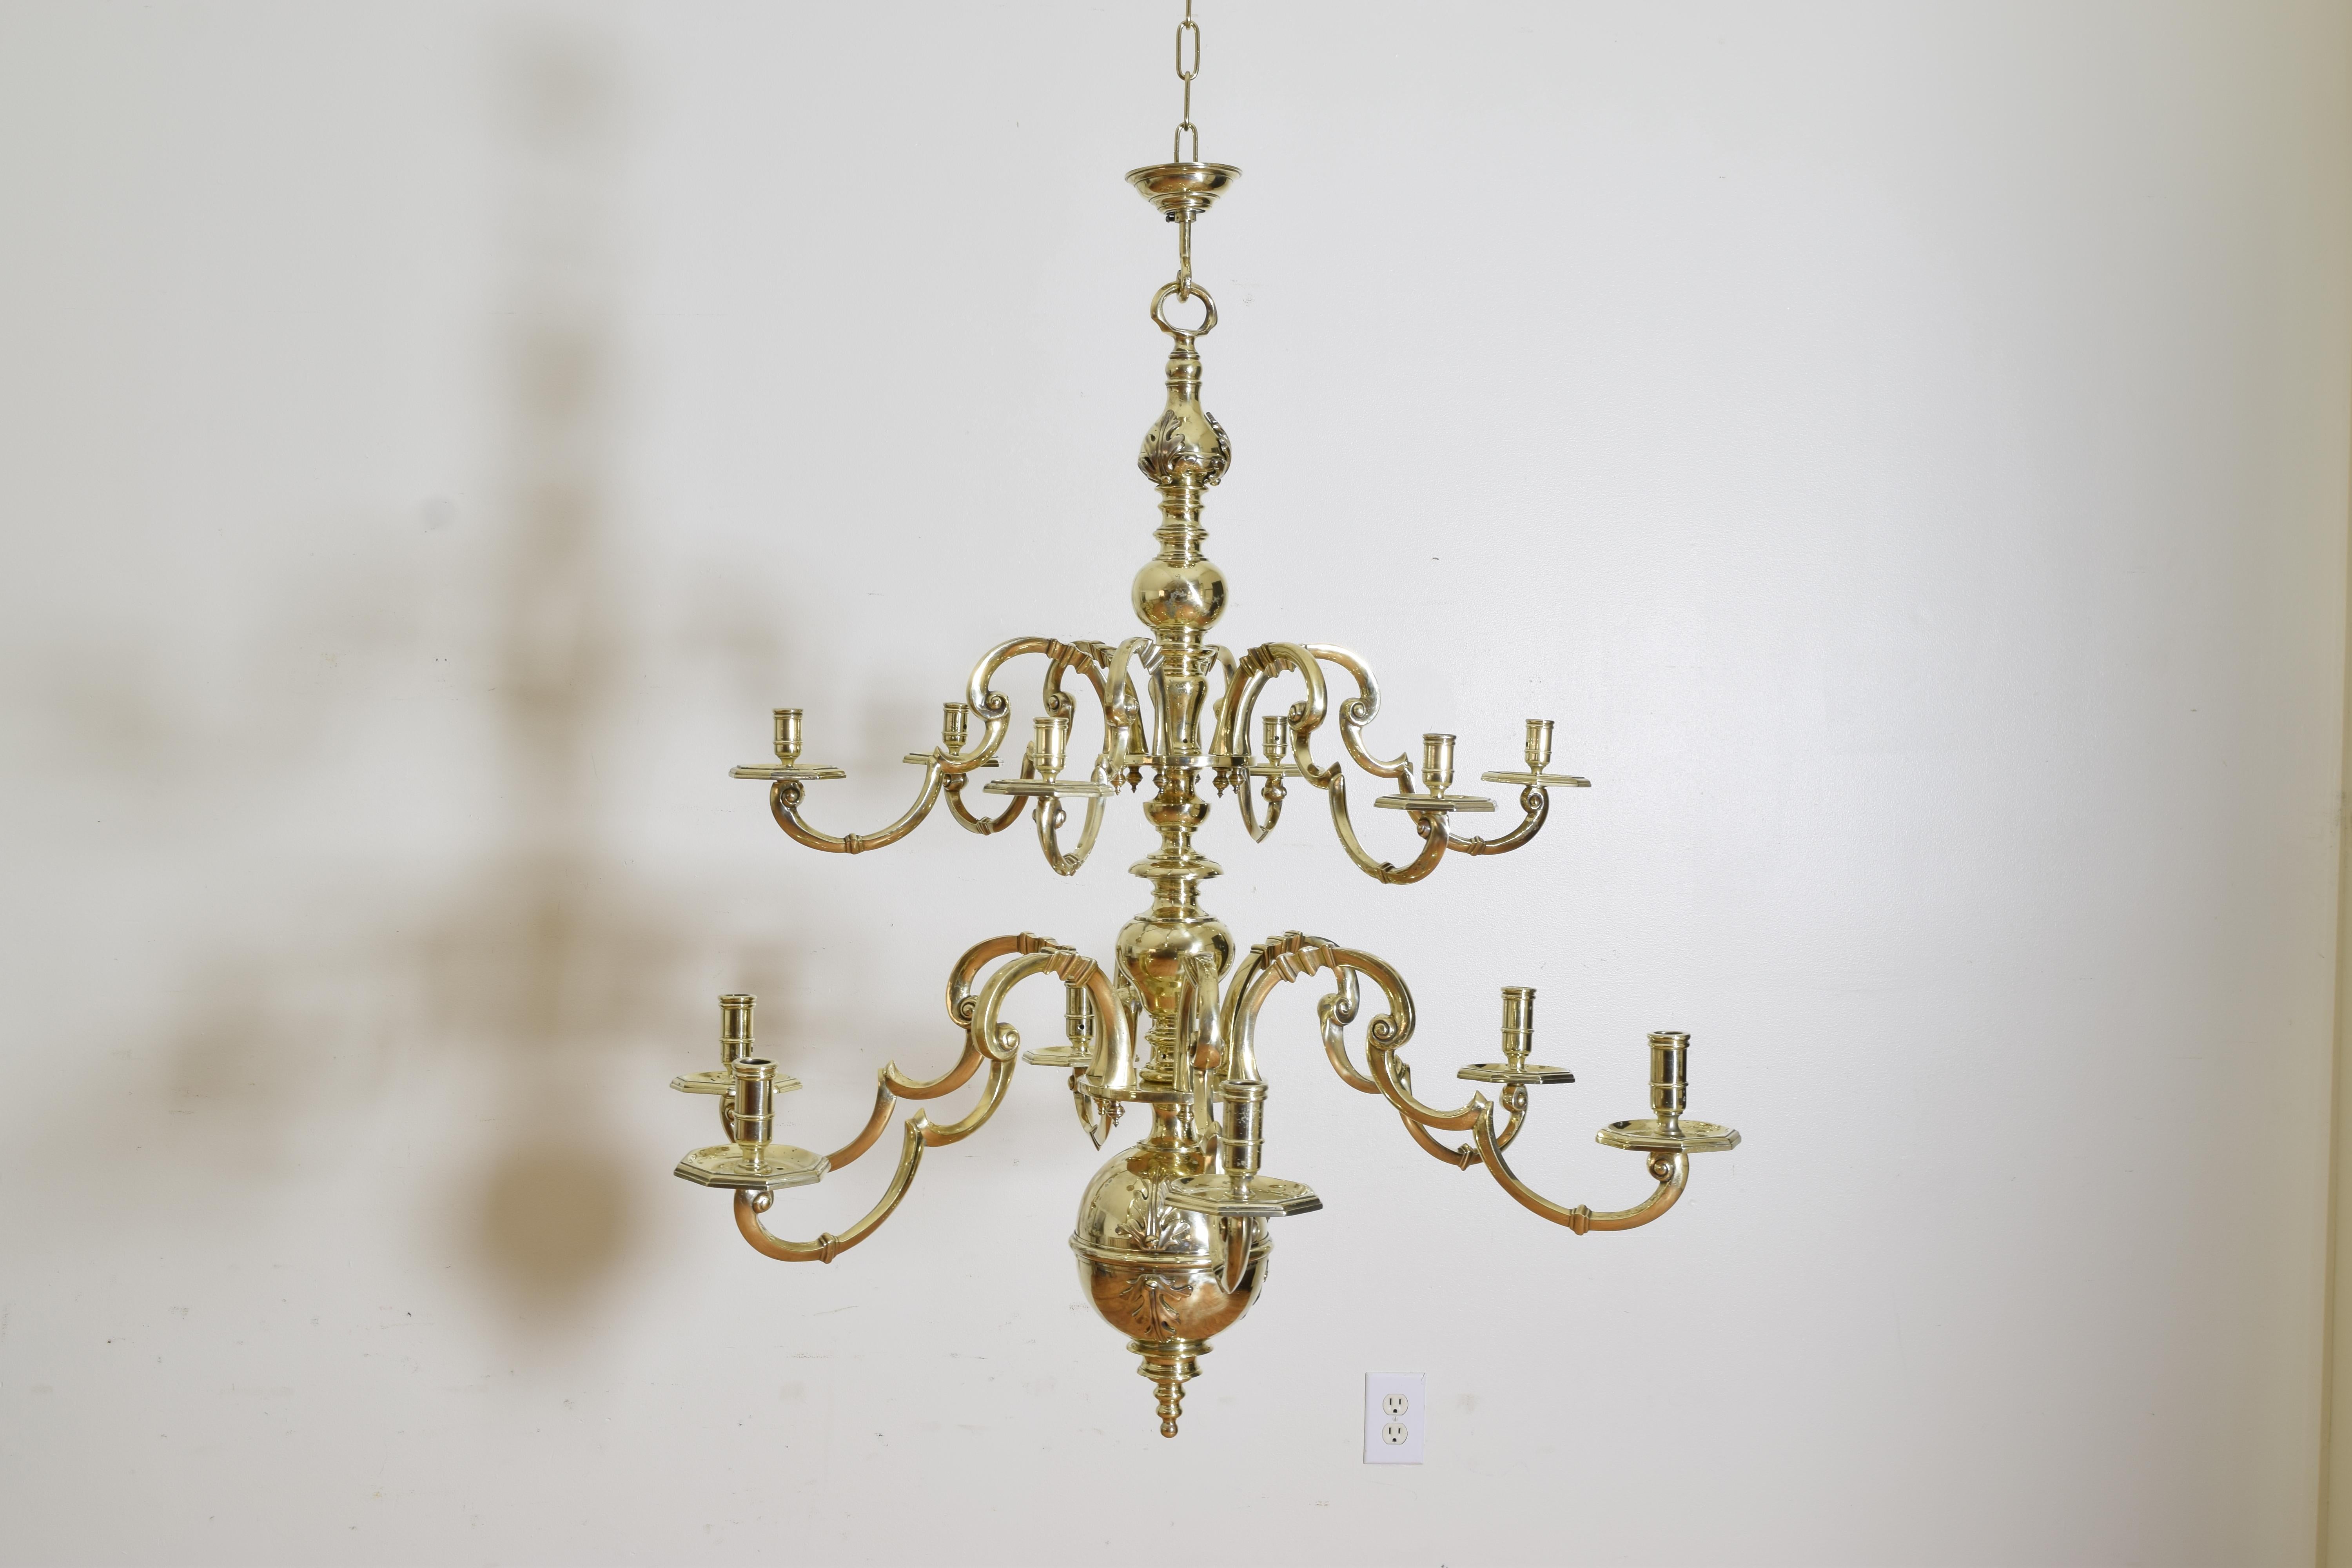 Of unique design and of exceptional quality this larger scale chandelier features two tiers with the upper tier having slightly smaller arms, originally a candle chandelier and now outwired with the wires reaching the interior and exiting the top,